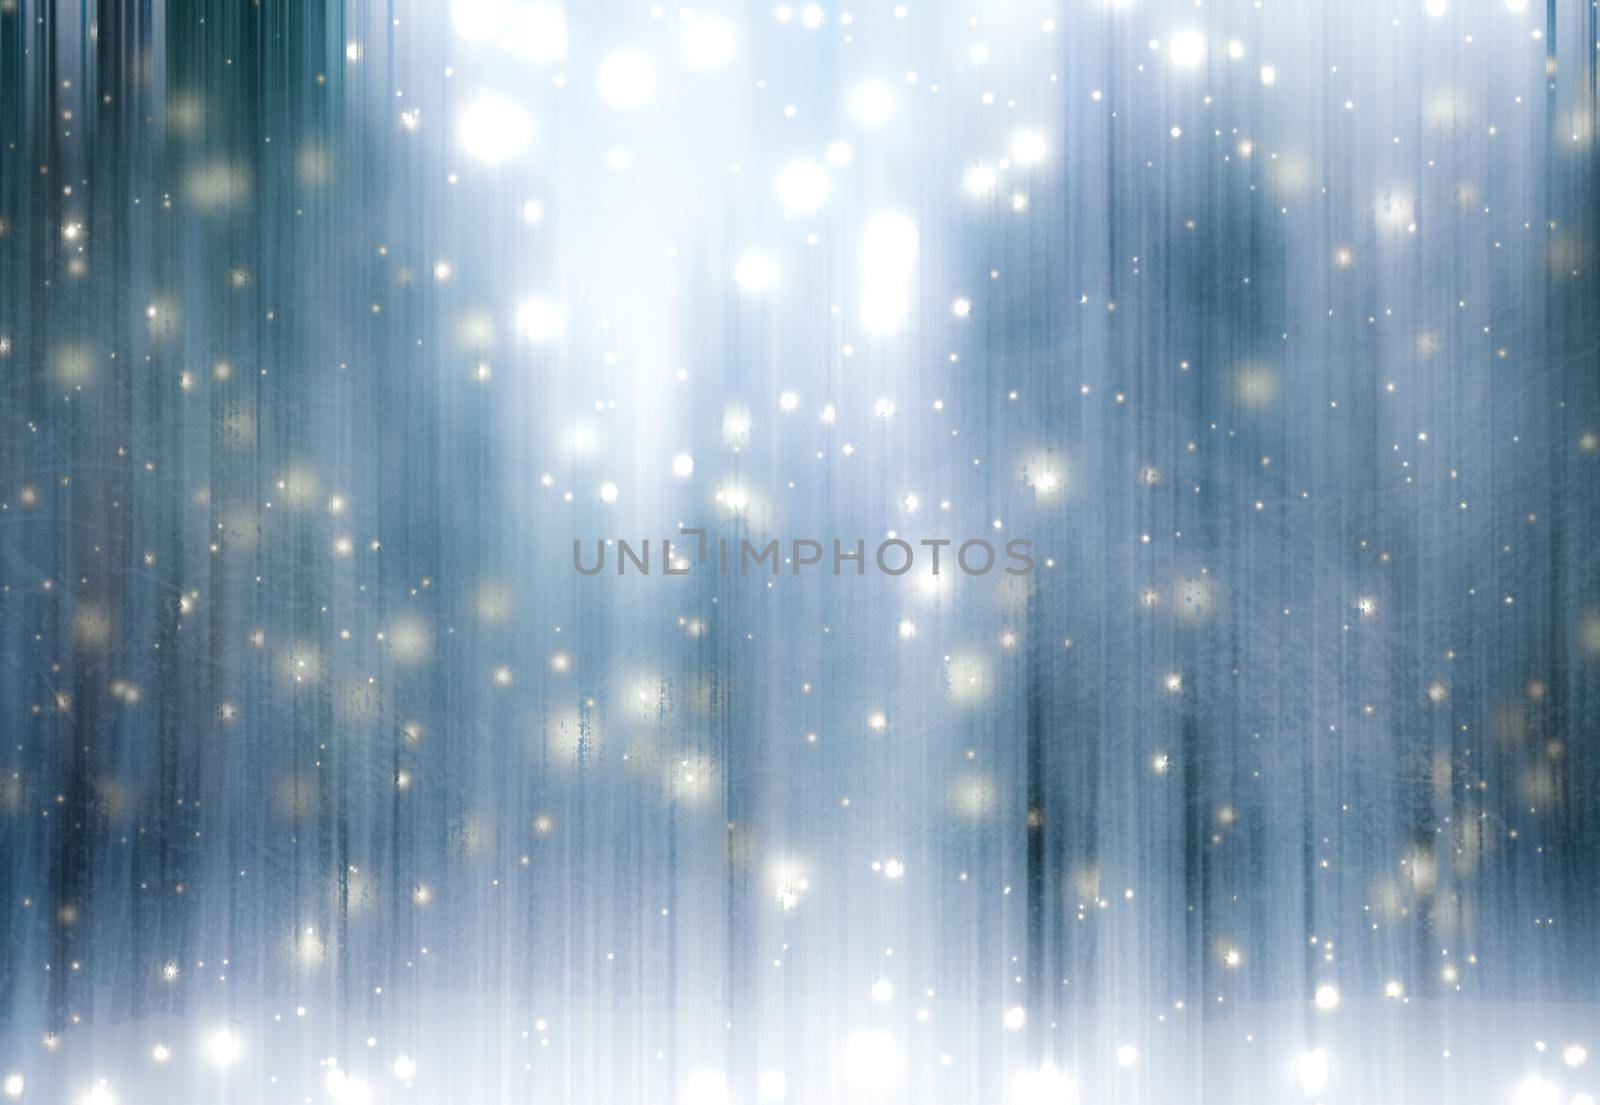 Holidays branding, fantasy and fairy tale concept - Winter season abstract nature art print and Christmas landscape holiday background, snowy magical forest as luxury brand postcard design backdrop